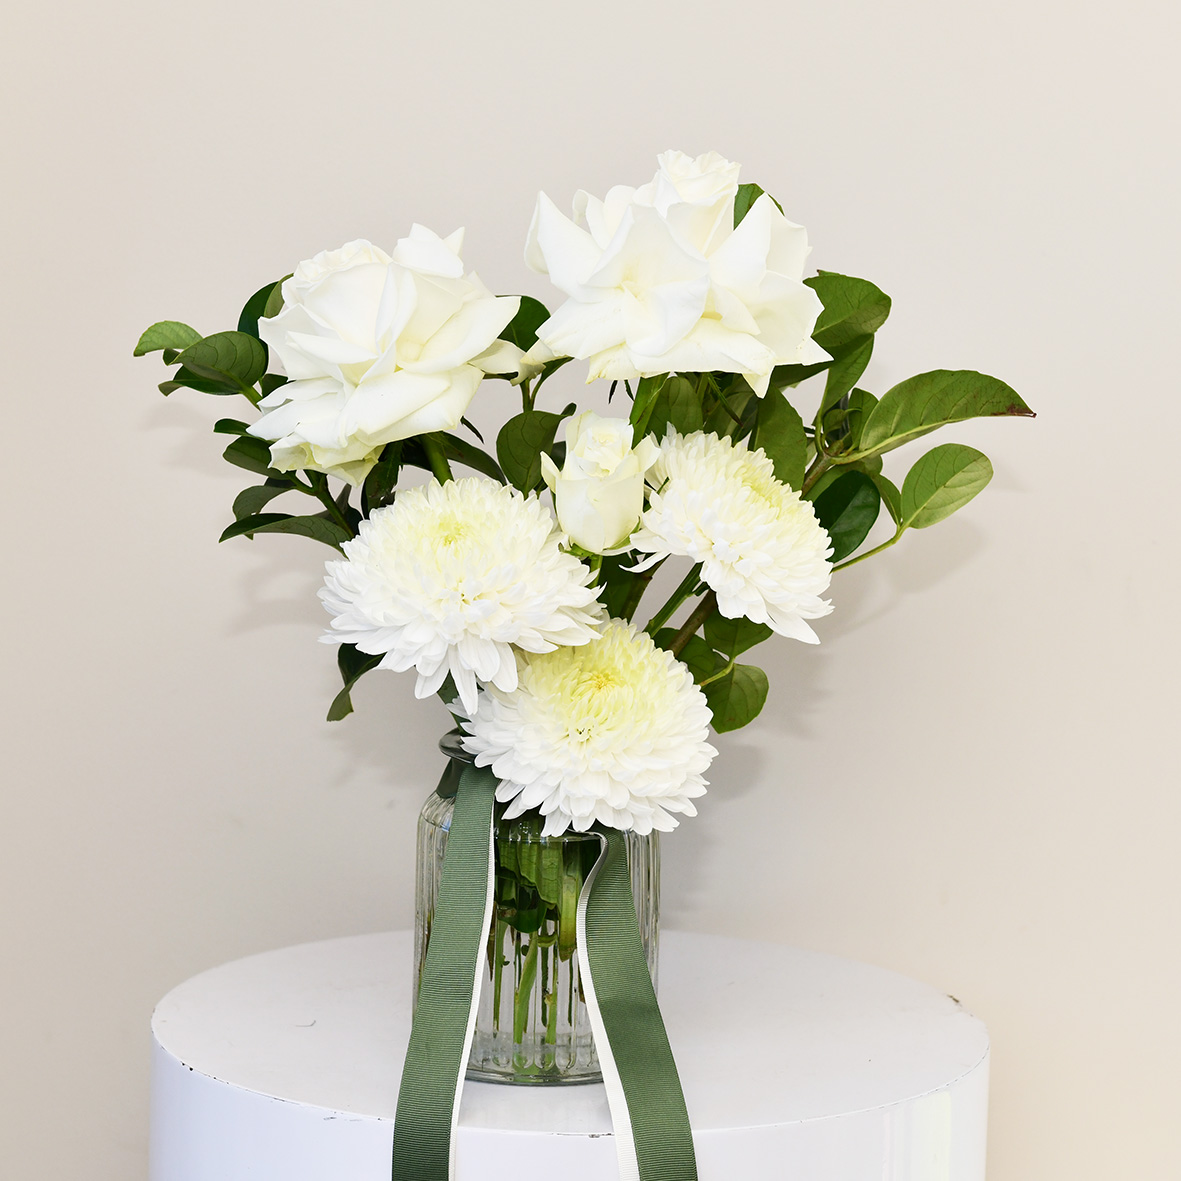 Sympathy flowers - White Blooms in a Jar